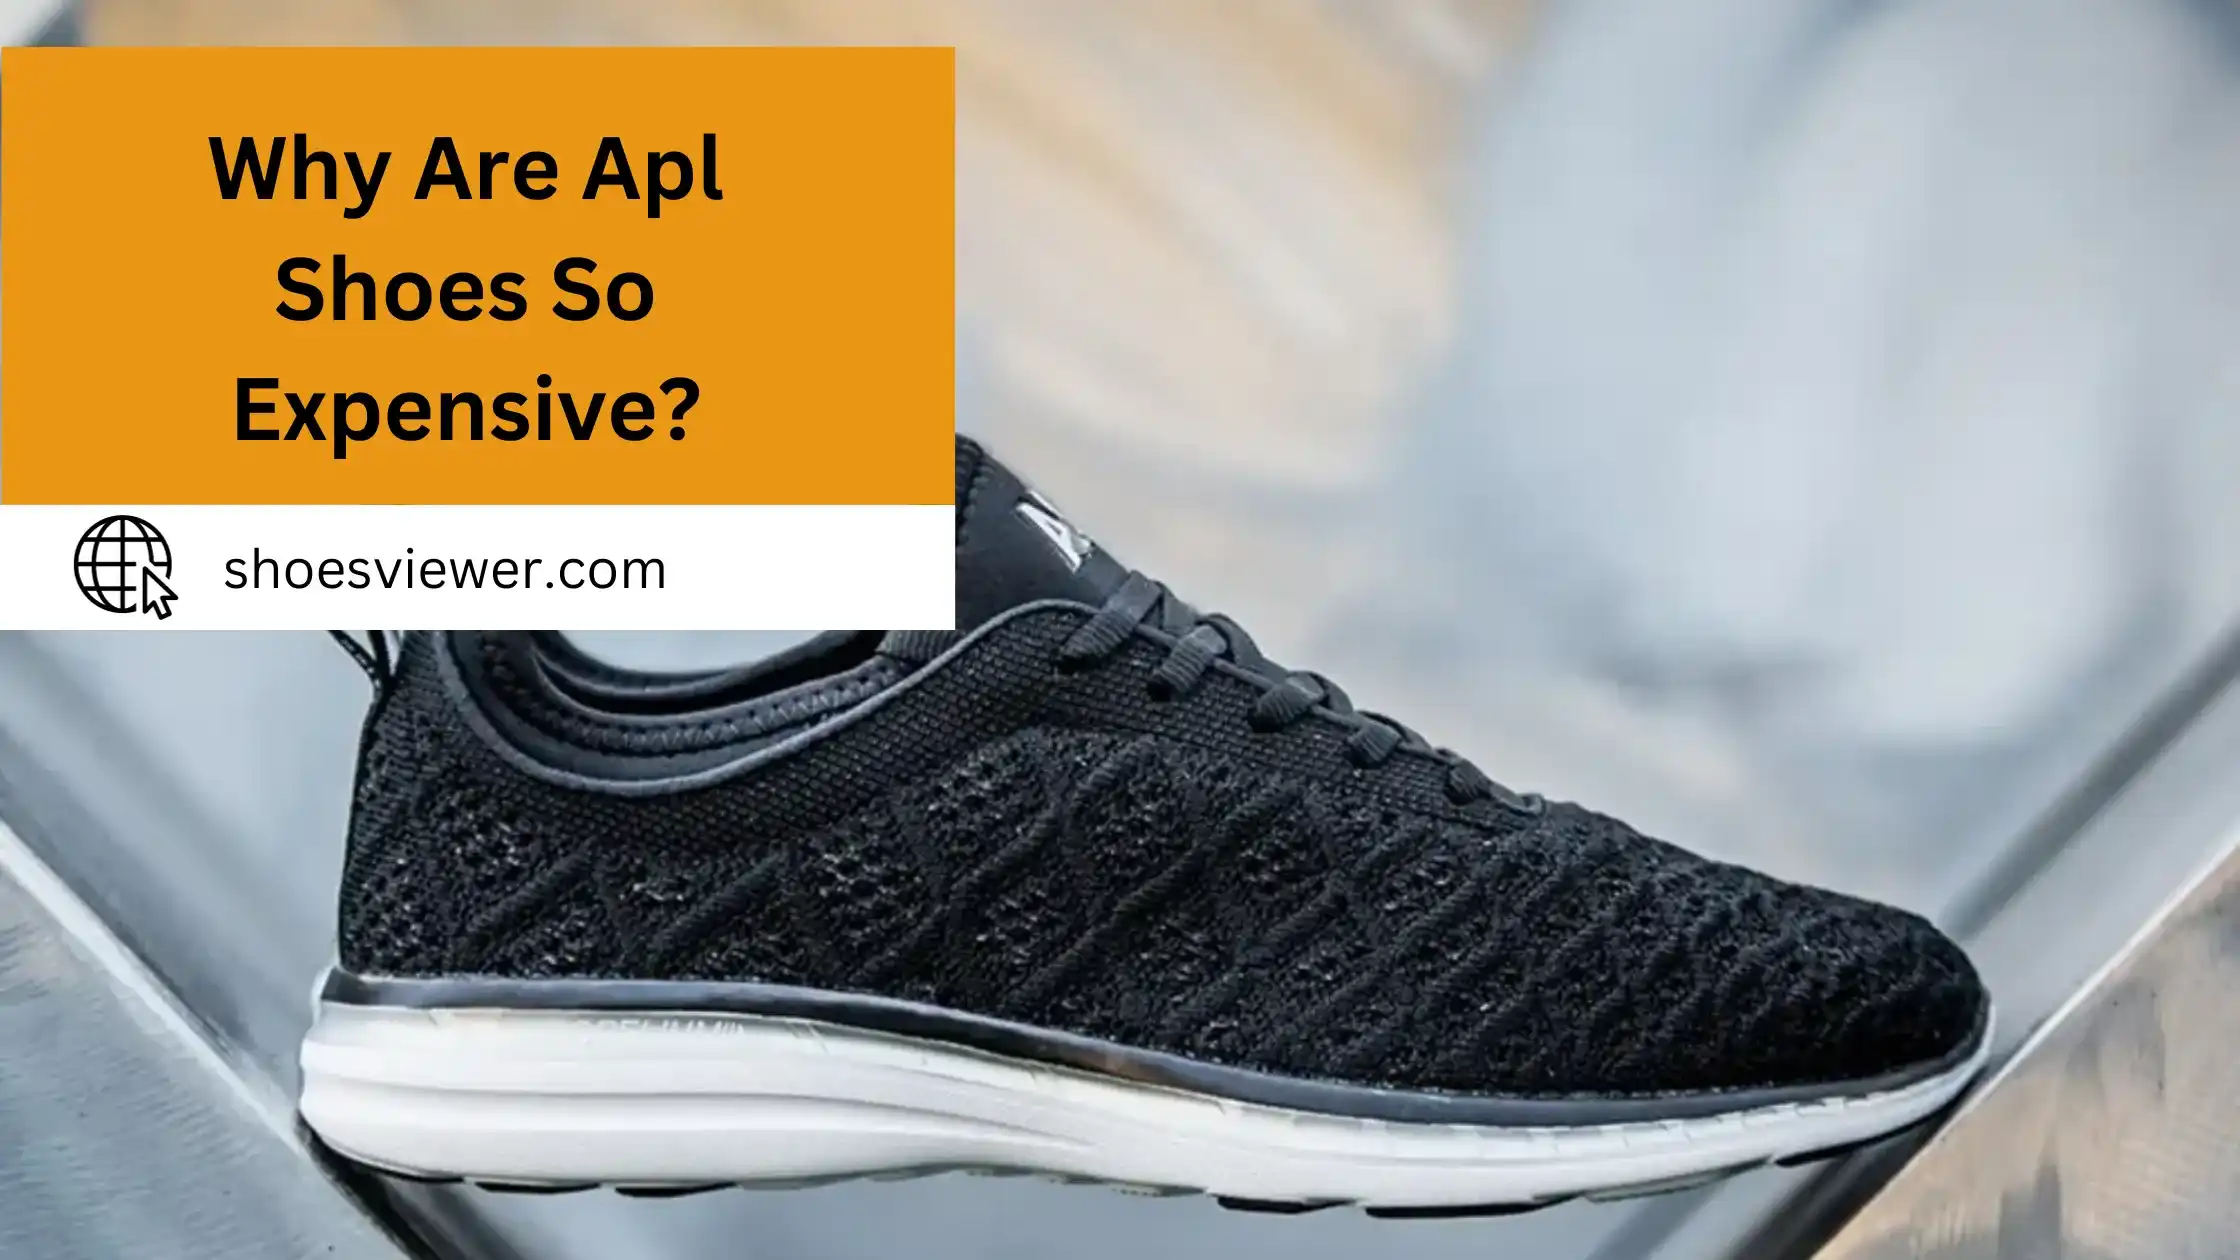 Why Are APL Shoes So Expensive? Detailed Information